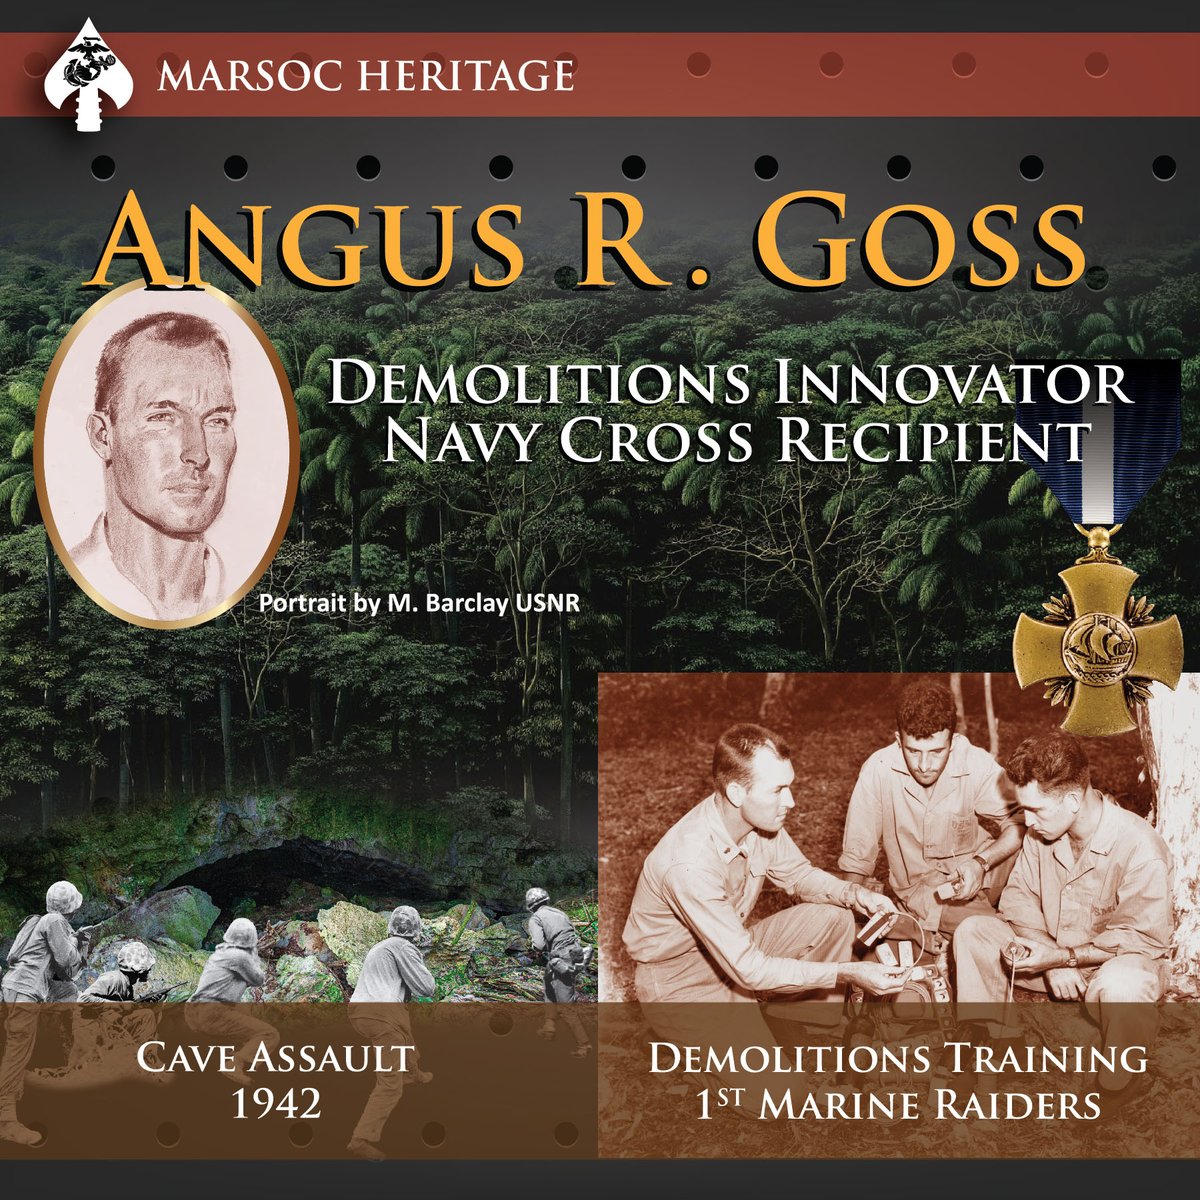 Angus R. Goss' seasoned leadership, and knowledge of demolitions, made him a valuable asset to the new 1st Marine Raider Battalion. His ingenuity, quick thinking, ferocious courage earned Goss the Navy Cross in 1942. To learn more about this hero, head over to our Facebook page.